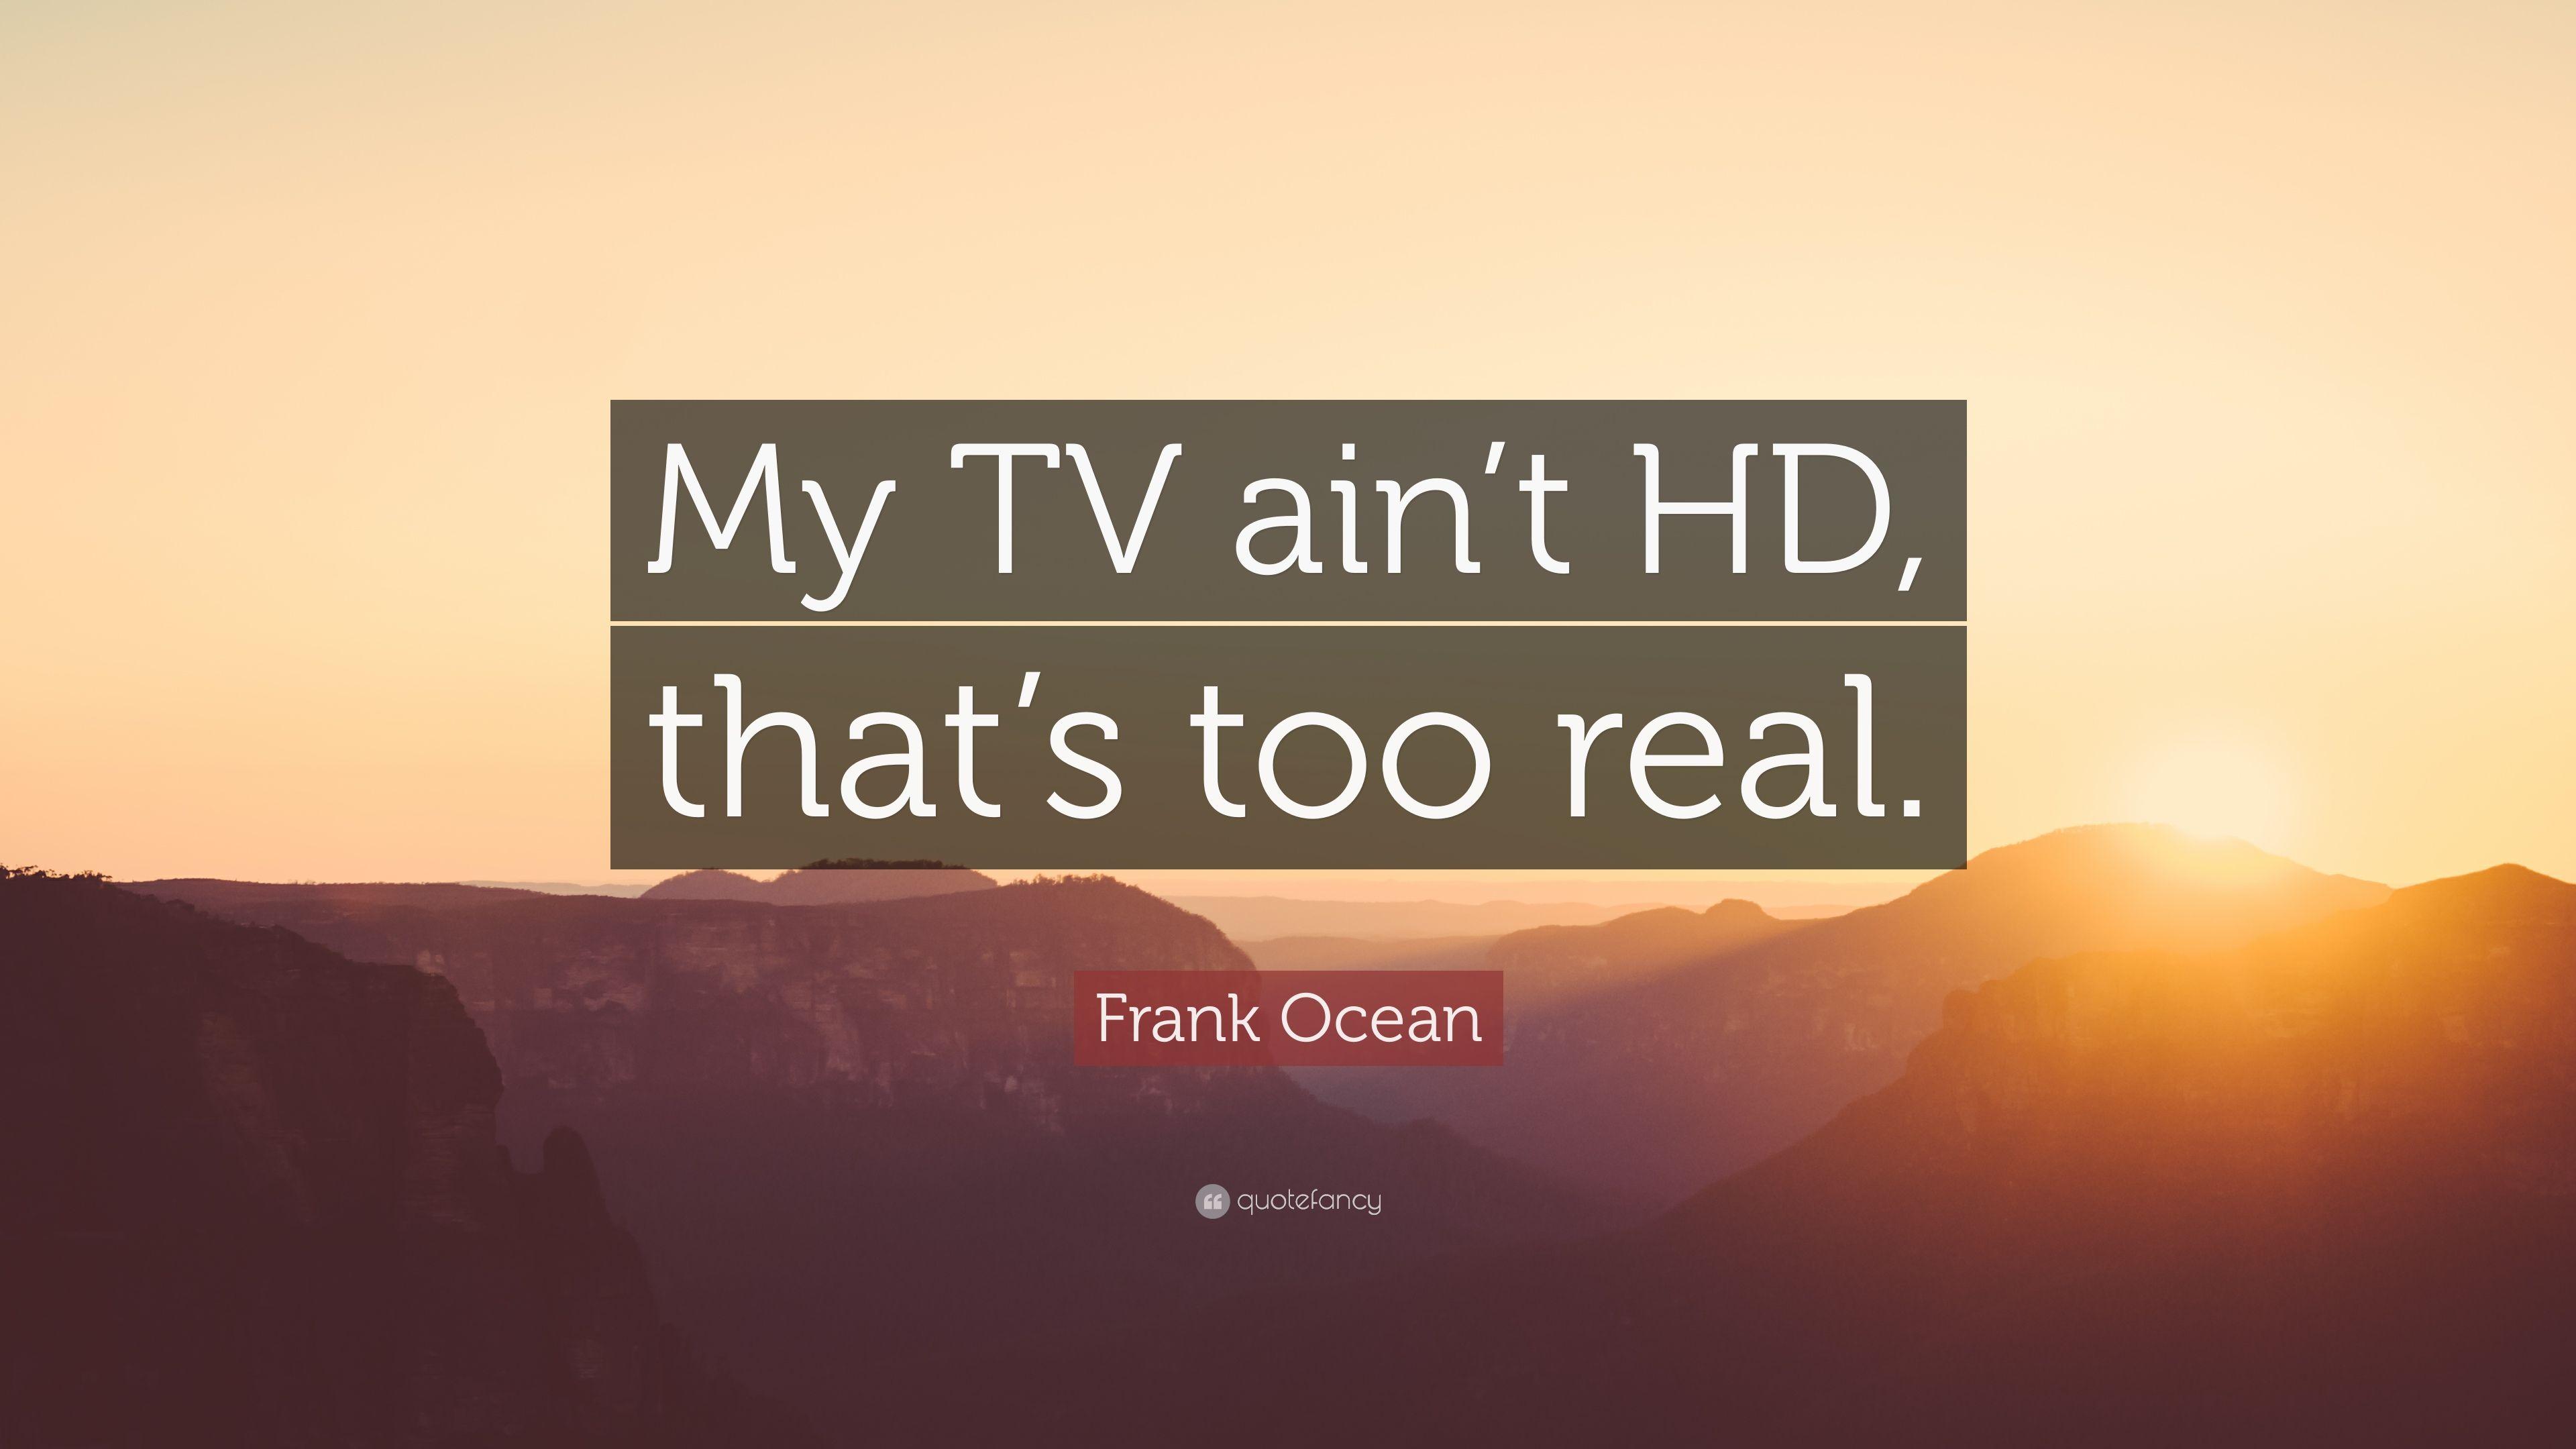 Frank Ocean Quote: “My TV ain't HD, that's too real.” 12